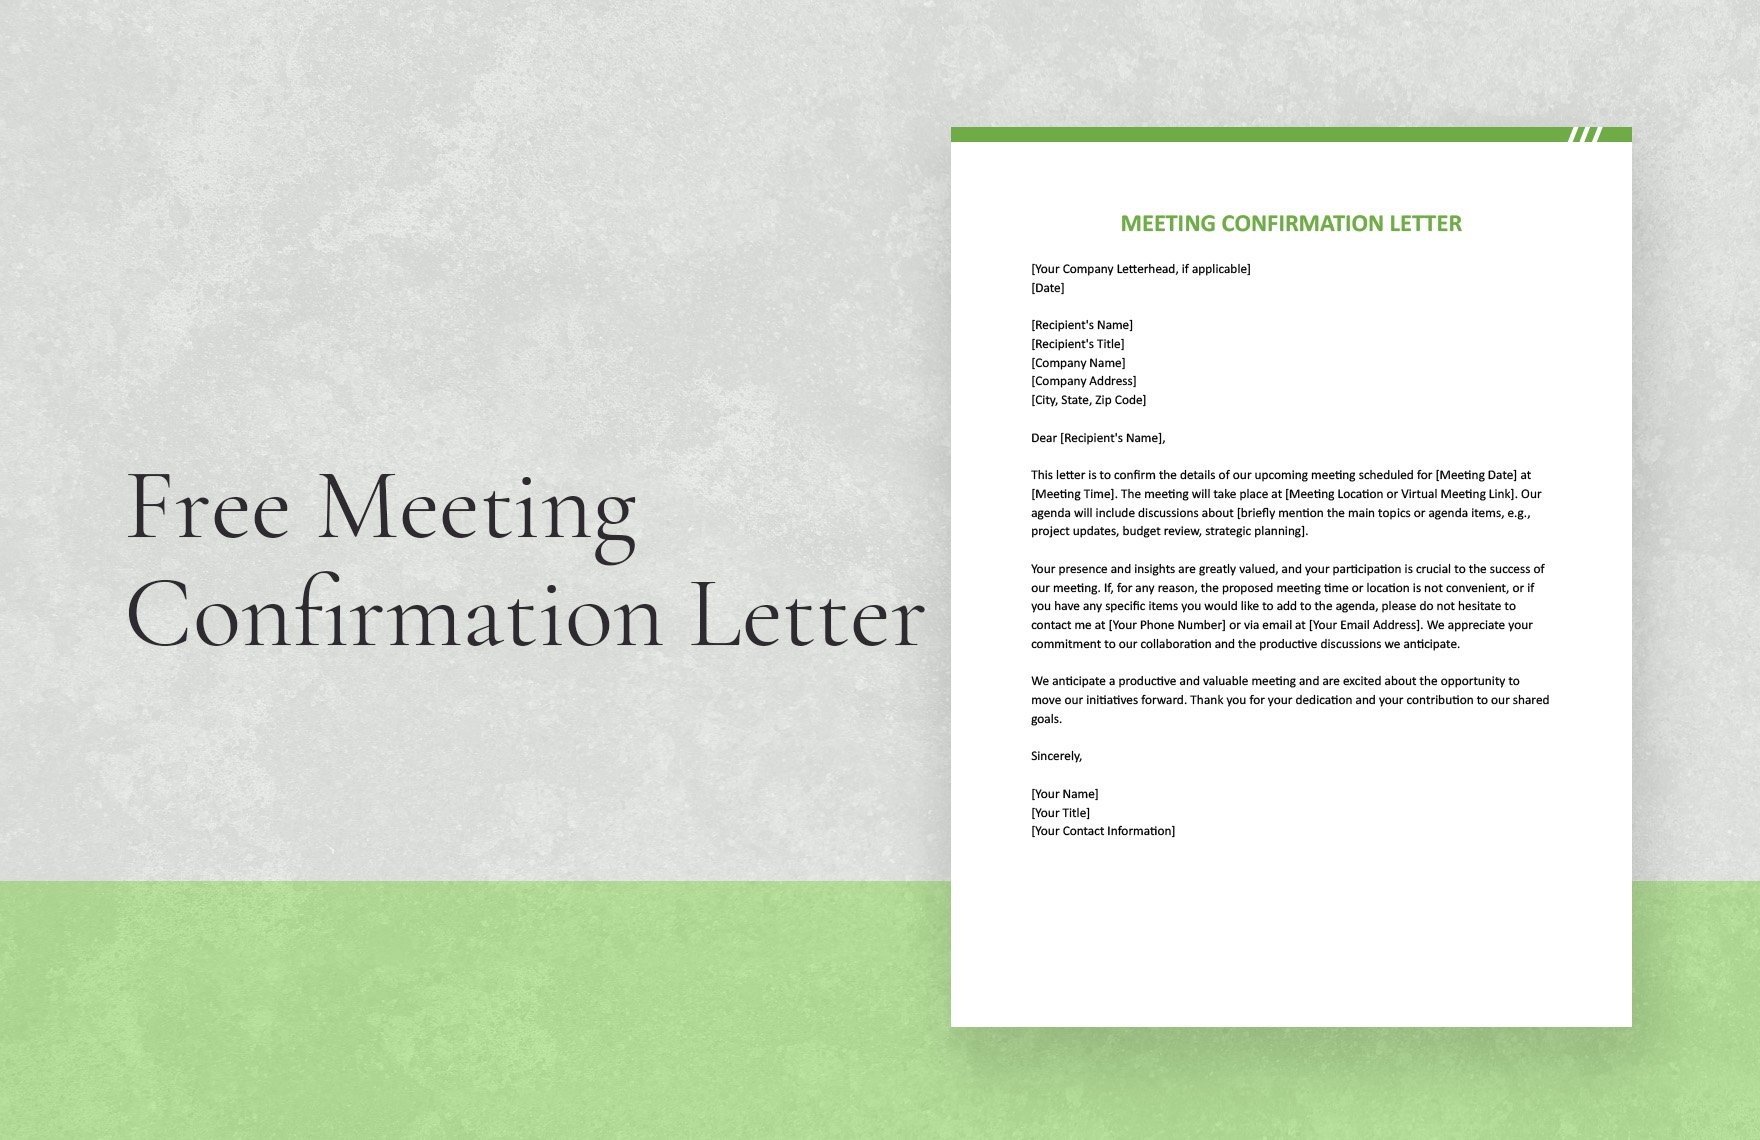 Free Meeting Confirmation Letter